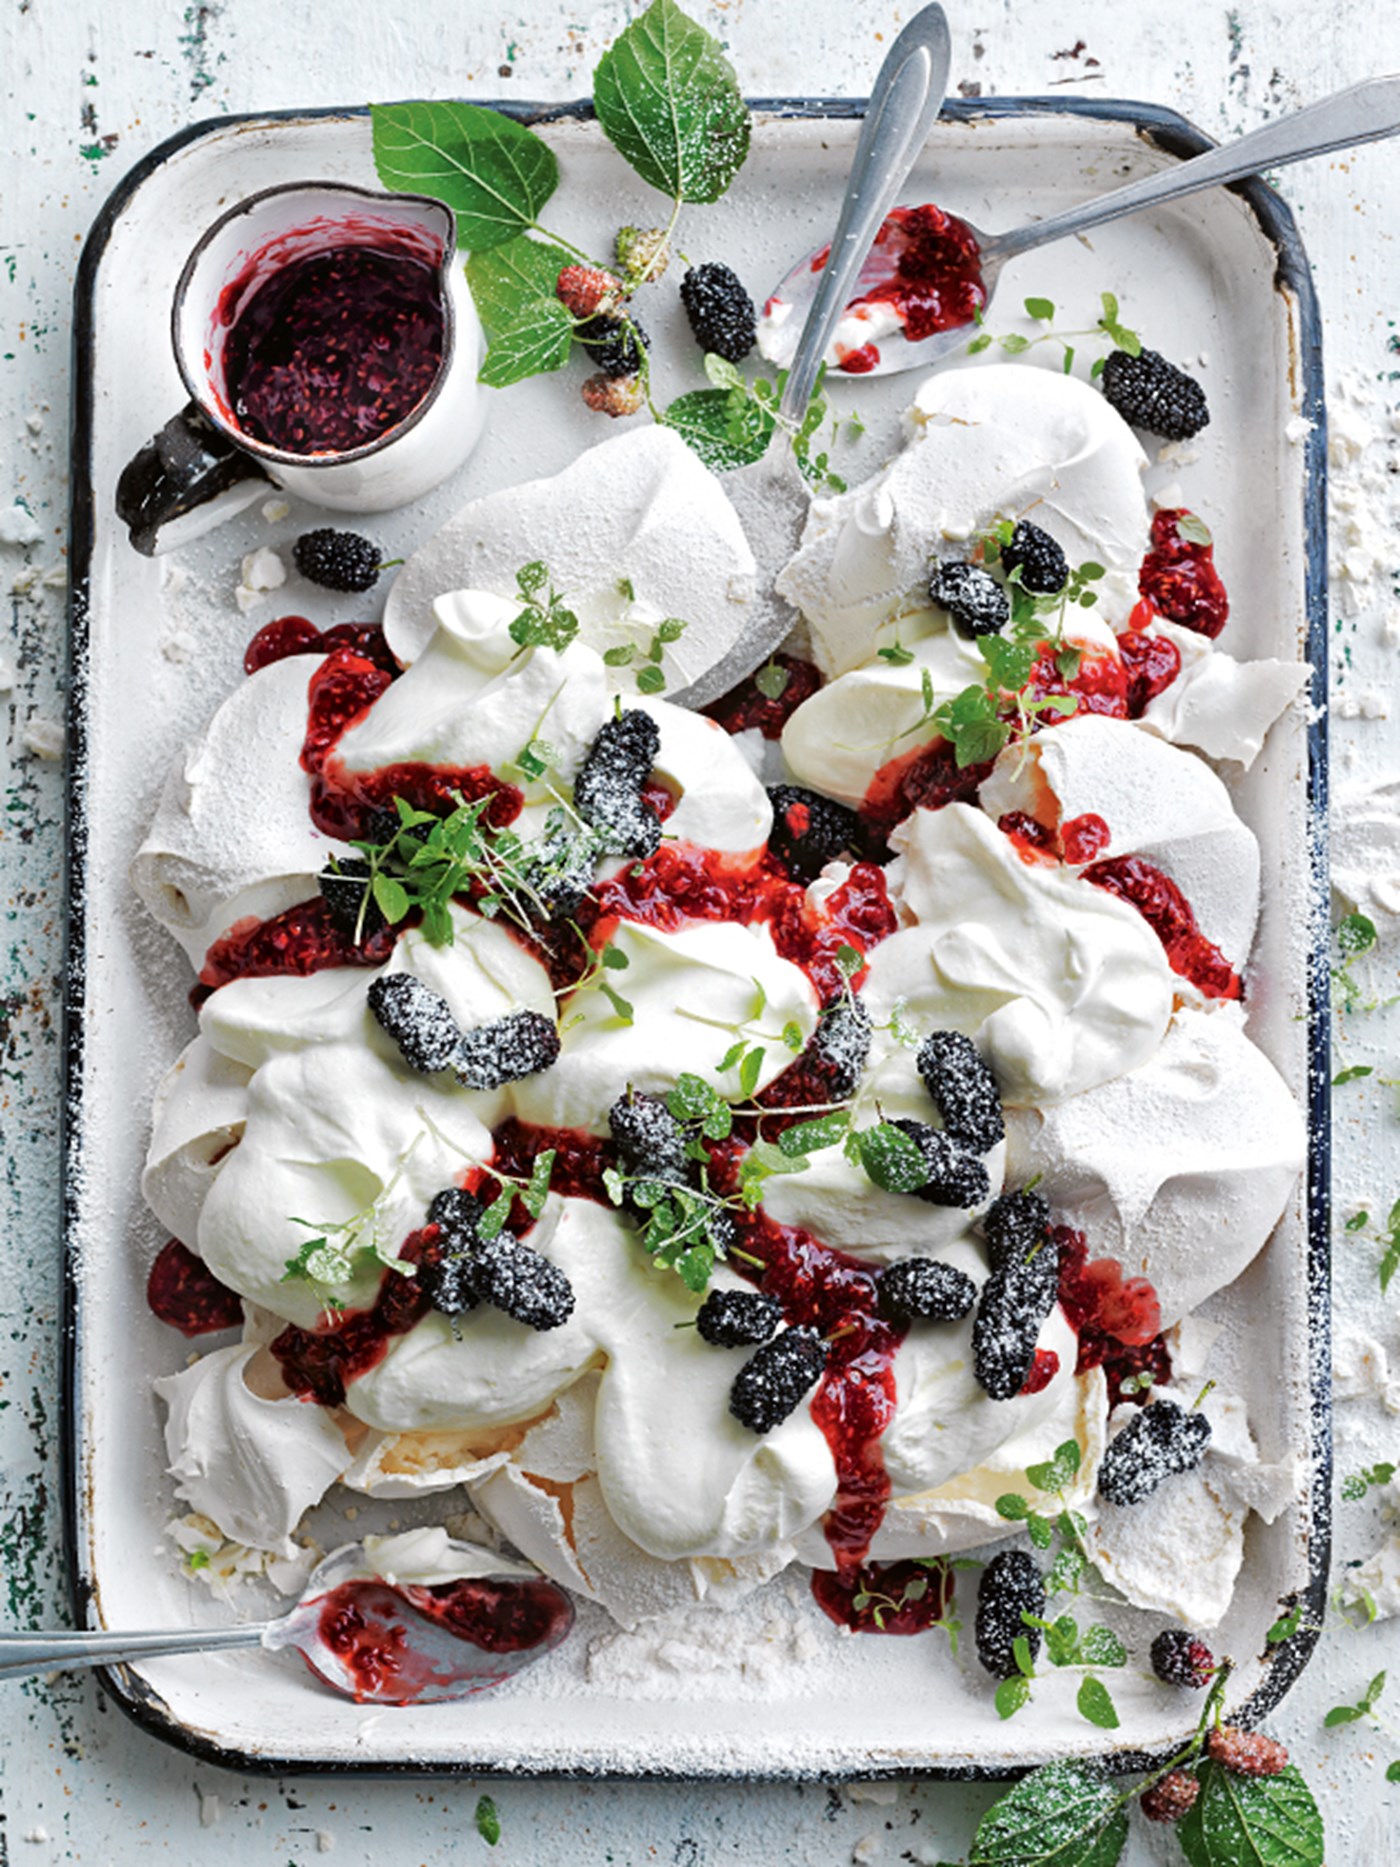 Smashed Pavlova With Mulberries and Roasted Raspberry Jam, Donna Hay